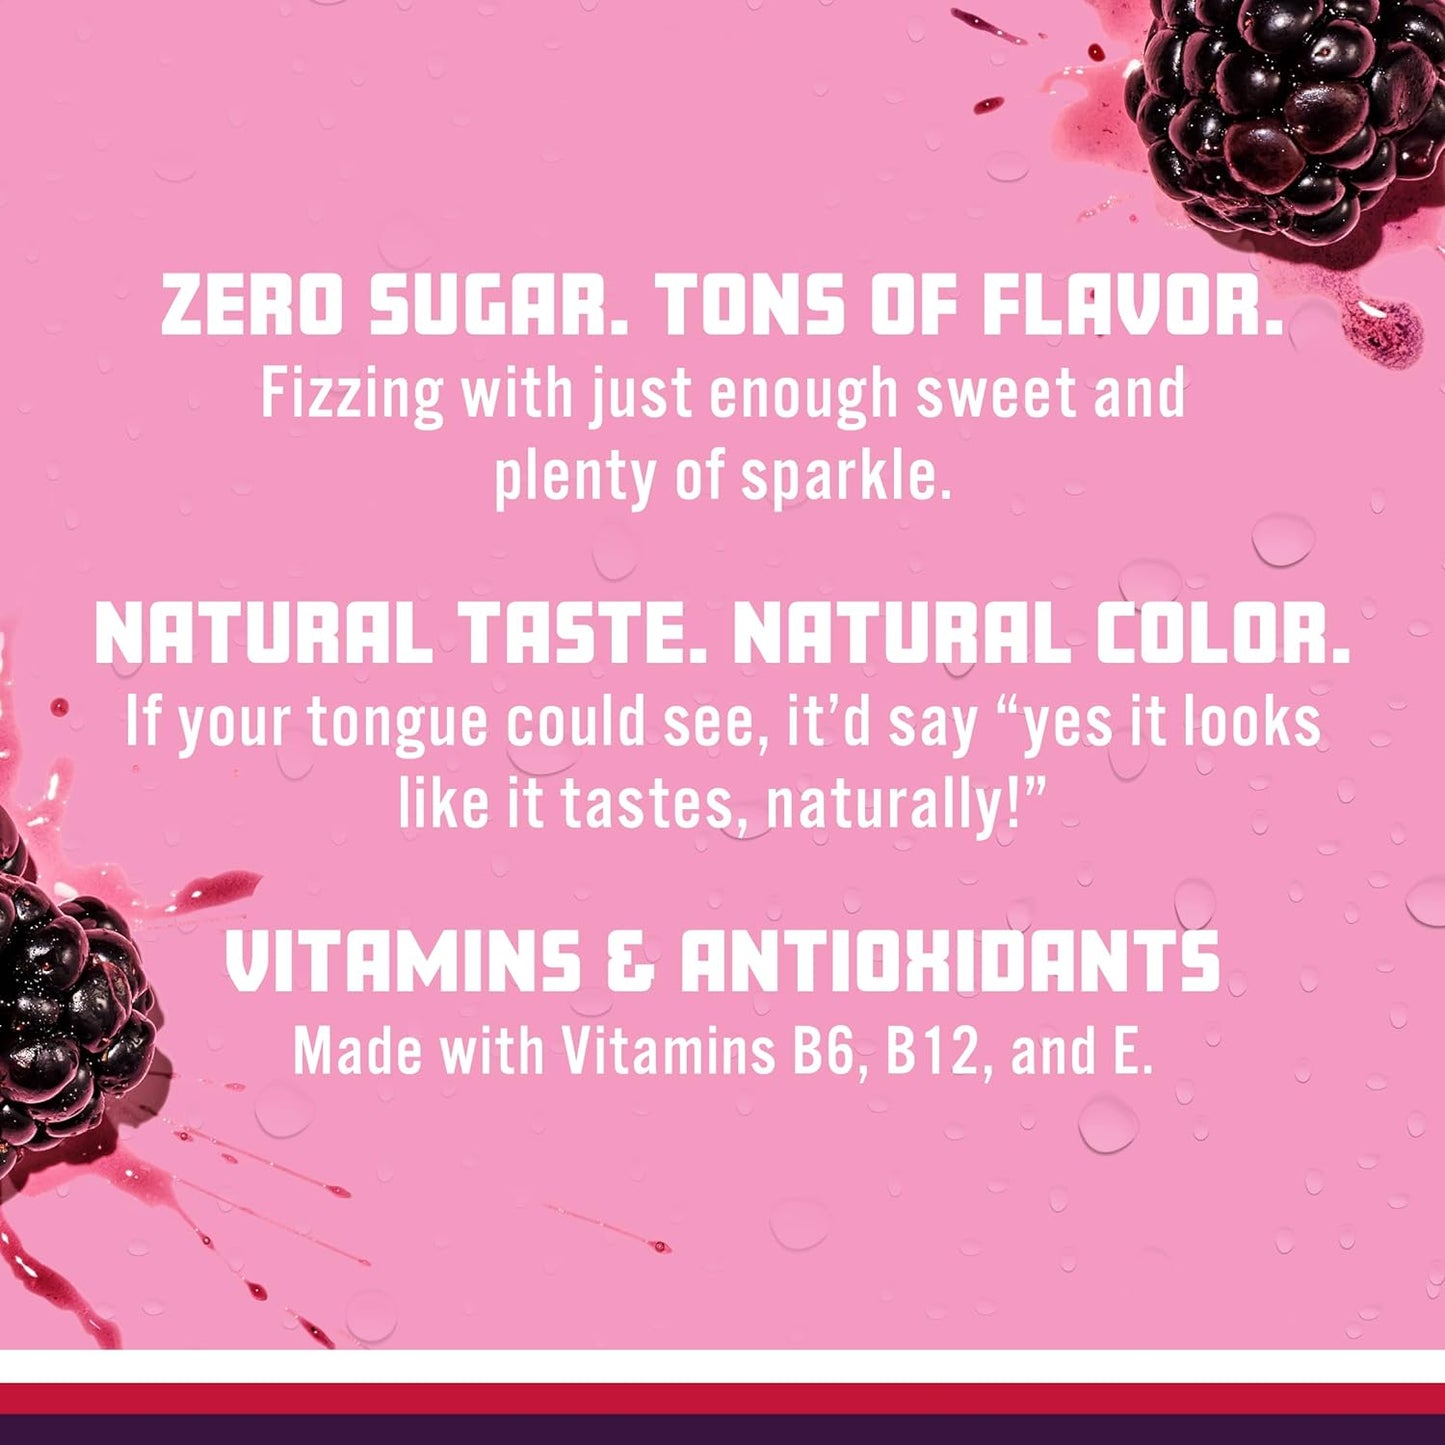 , Black Raspberry Sparkling Water, Zero Sugar Flavored Water, with Vitamins and Antioxidants, Low Calorie Beverage, 17 Fl Oz Bottles (Pack of 12)